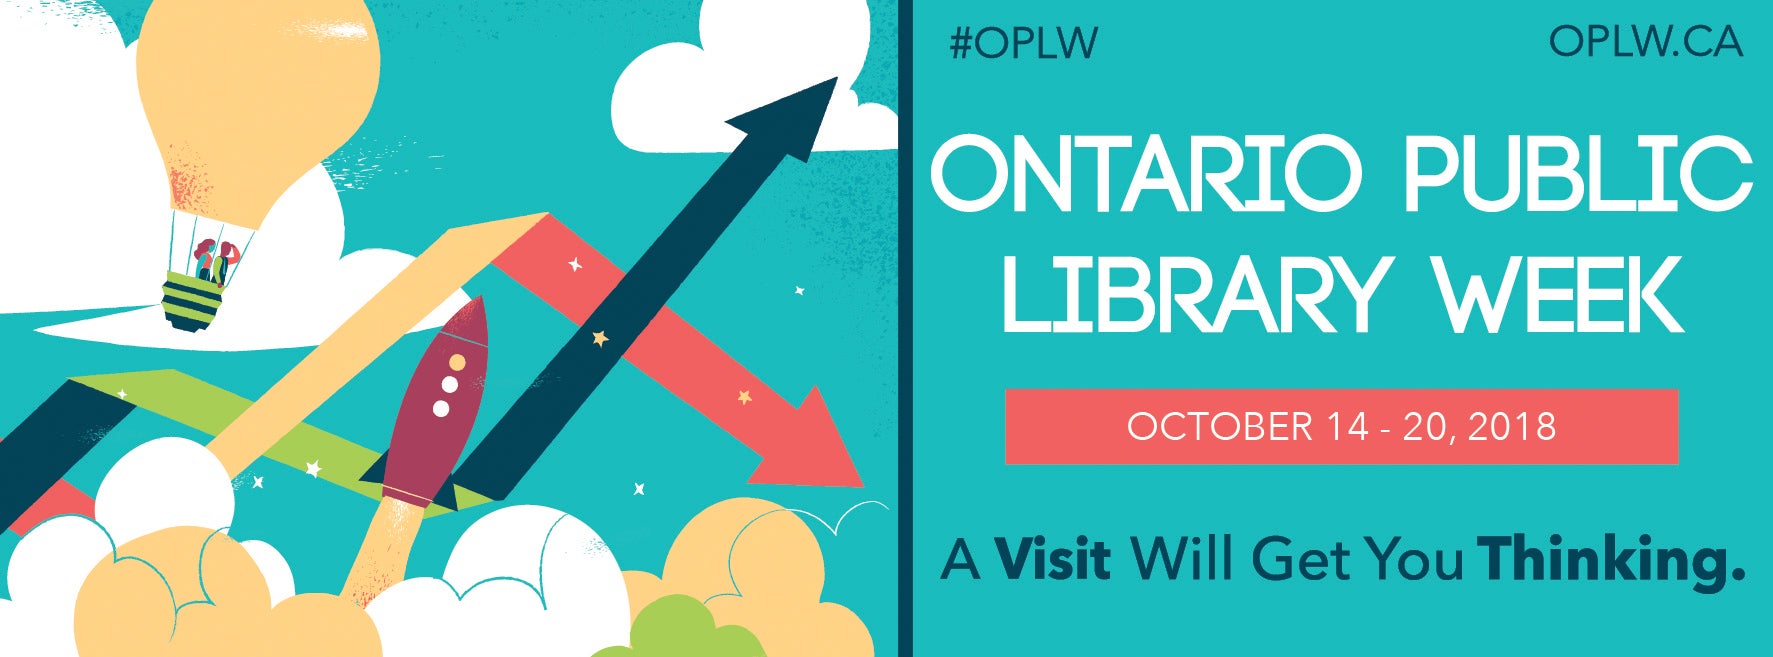 Illustration of blue sky and hot air balloon. Text: Ontario Public Library Week October 14-20 2018. A visit will get you thinking.